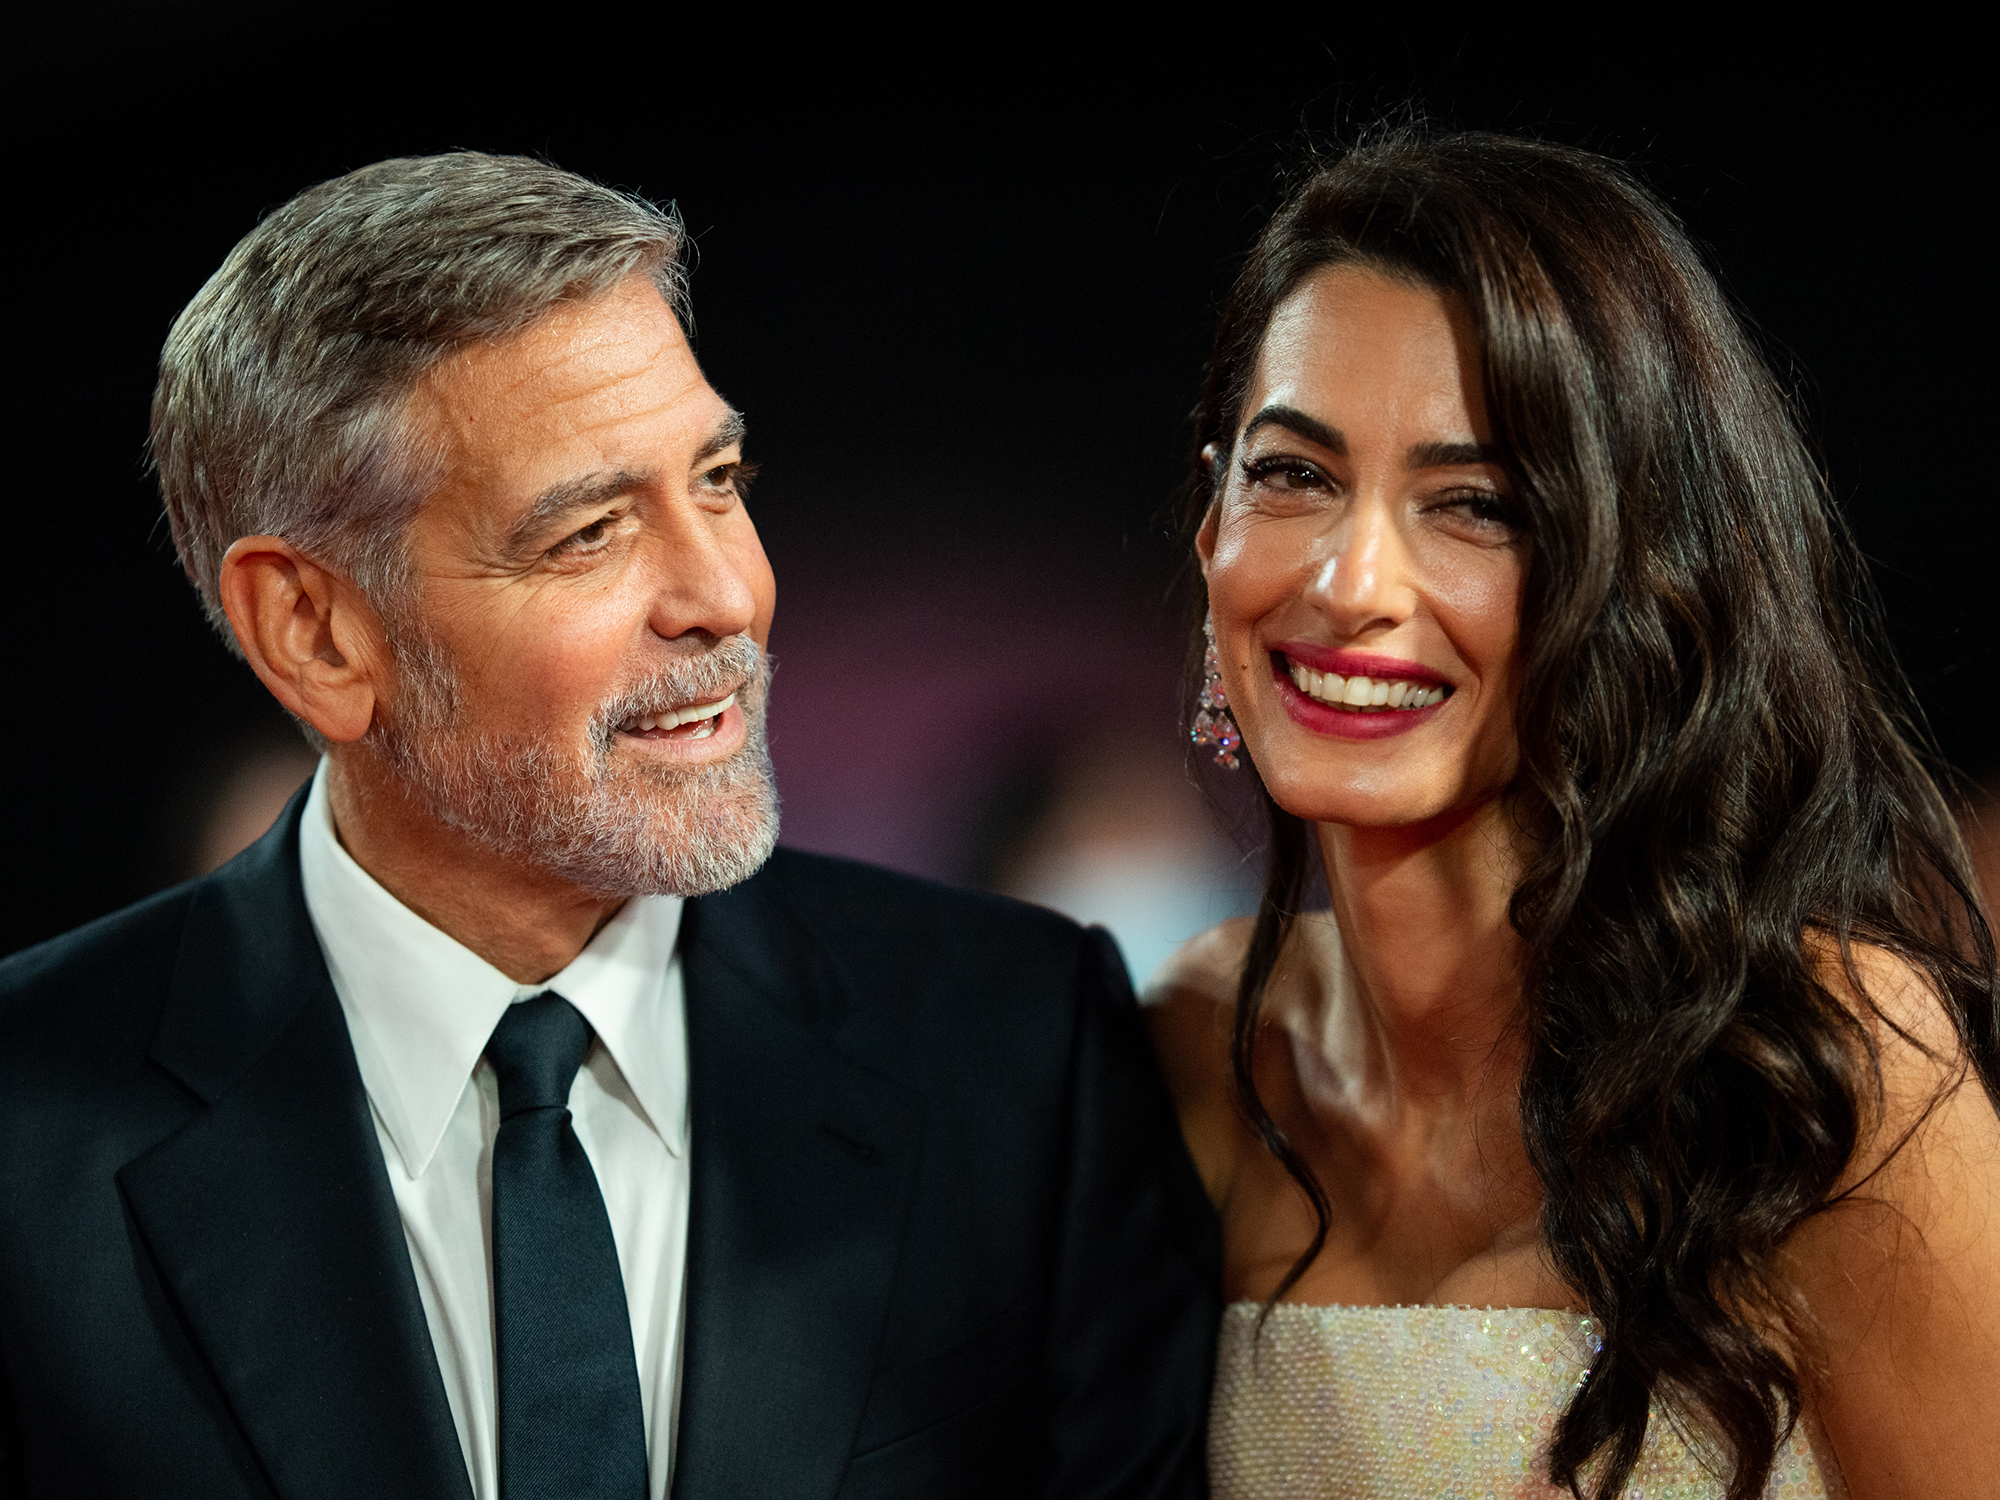 George Clooney and Amal Clooney attend "The Tender Bar" Premiere during the 65th BFI London Film Festival at The Royal Festival Hall on October 10, 2021 in London, England